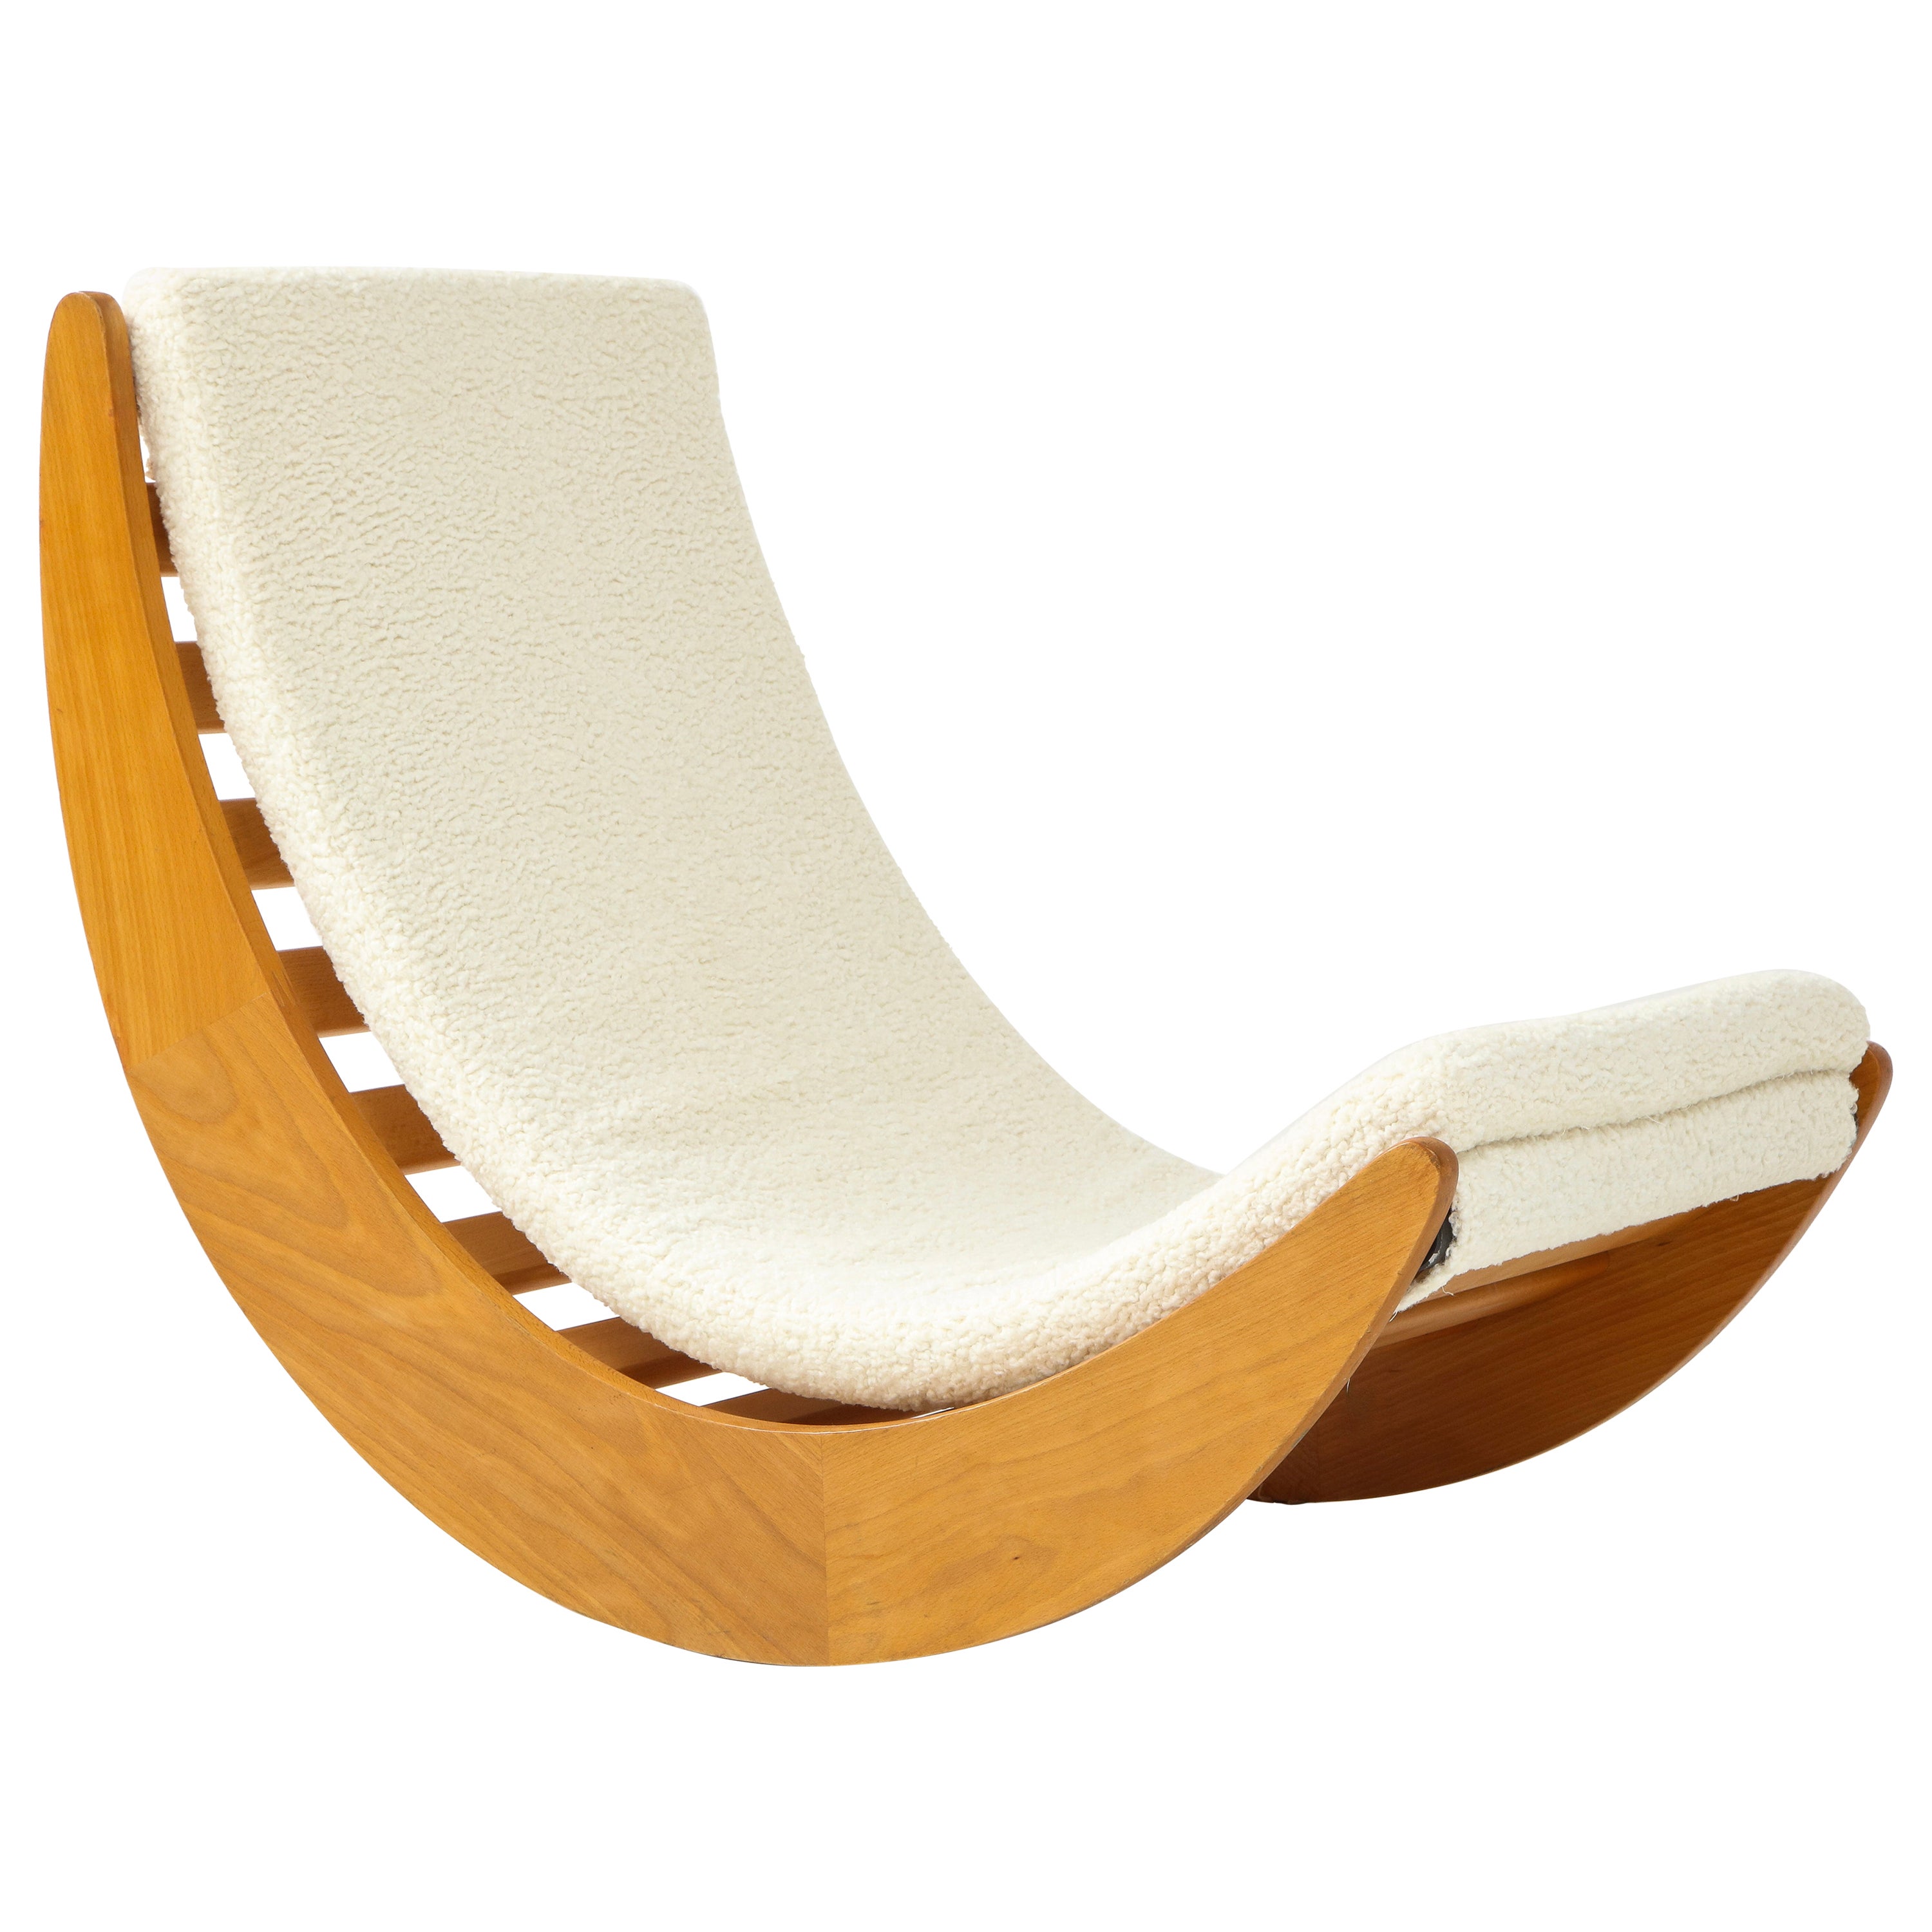 Danish Blond Wood "Relaxer" Rocking Chair by Vernor Panton for Rosenthal, 1970s